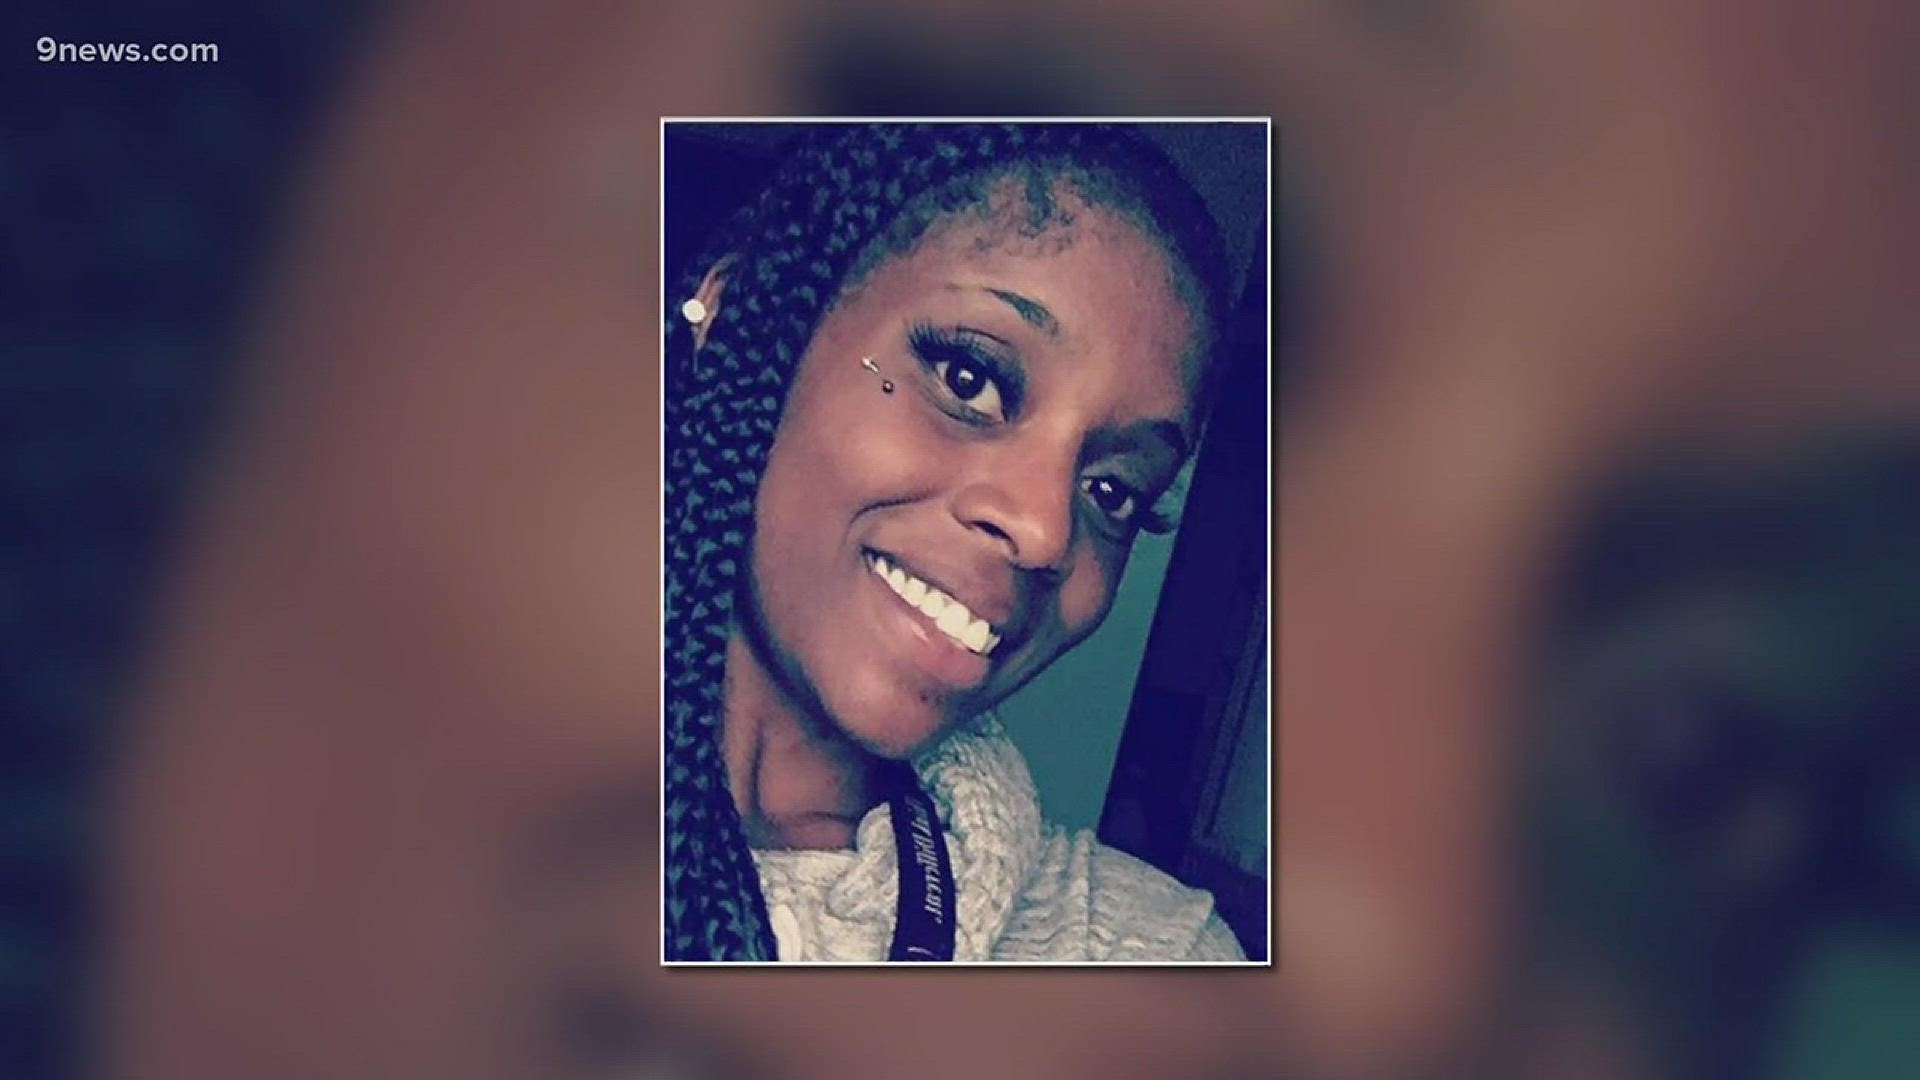 A 23-year-old Aurora woman was reported missing in December by her family. The Colorado Bureau of Investigation said on Tuesday that her remains were found near the town of Aguilar.